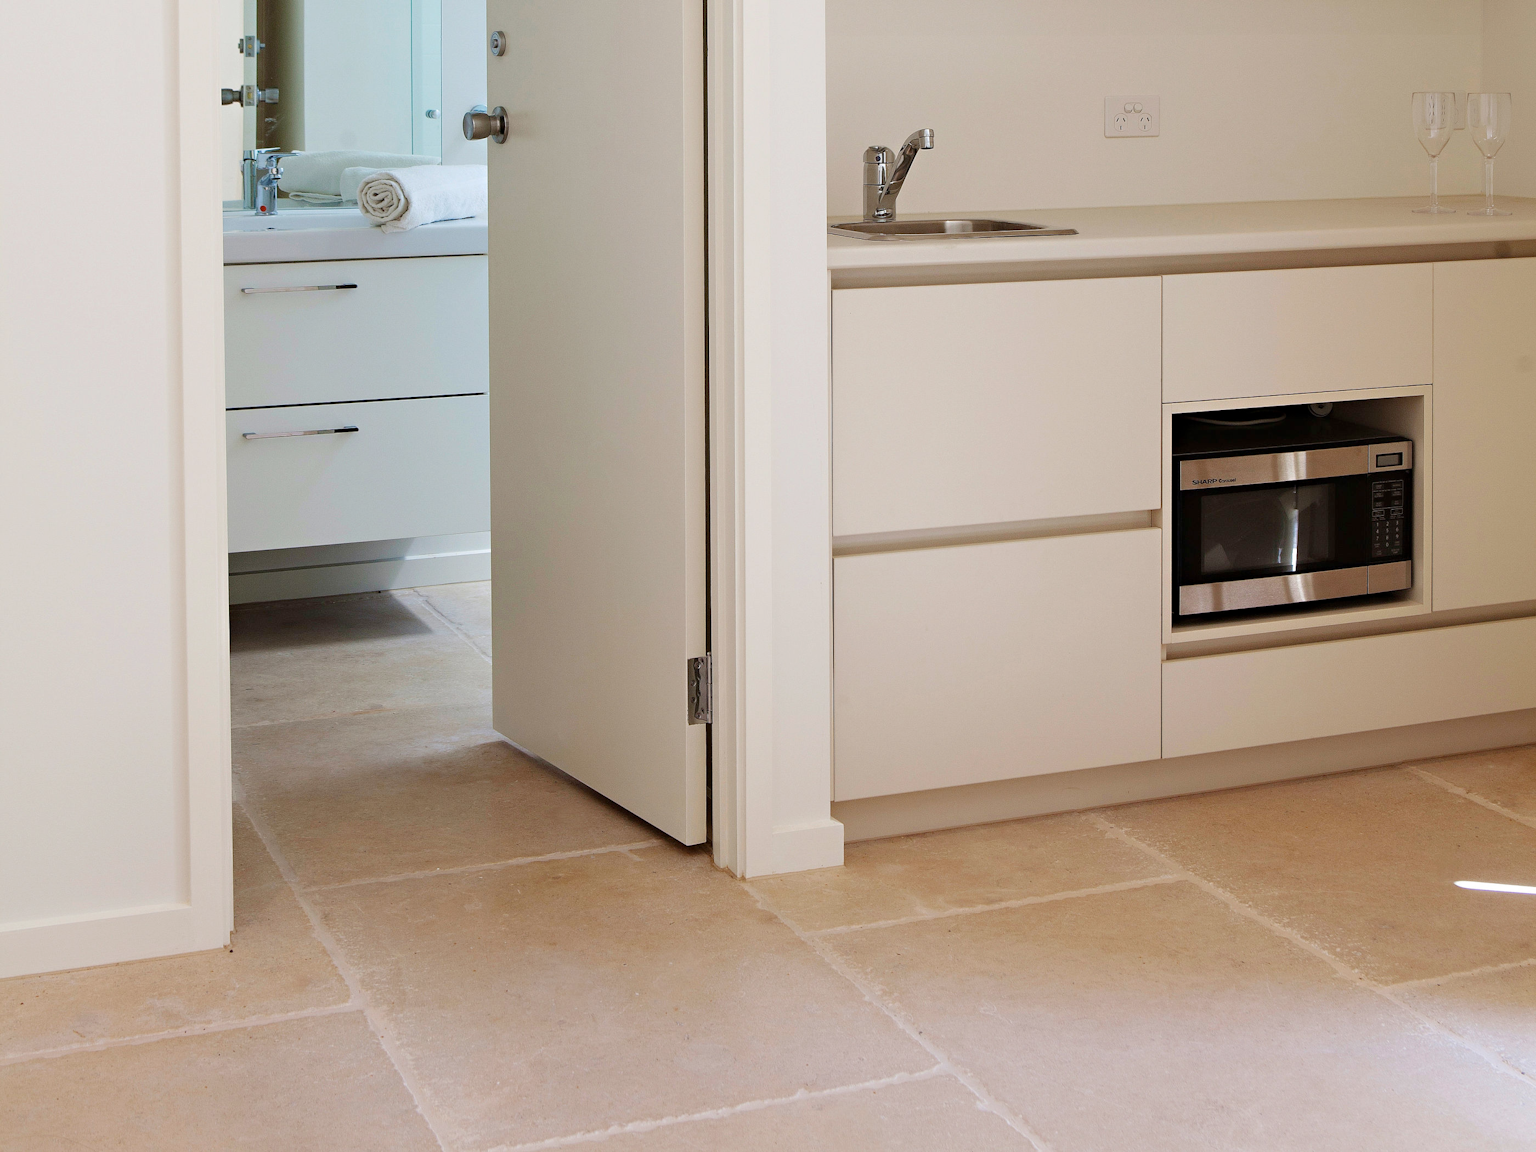 La Roche limestone pavers used internally throughout kitchen and bathroom areas